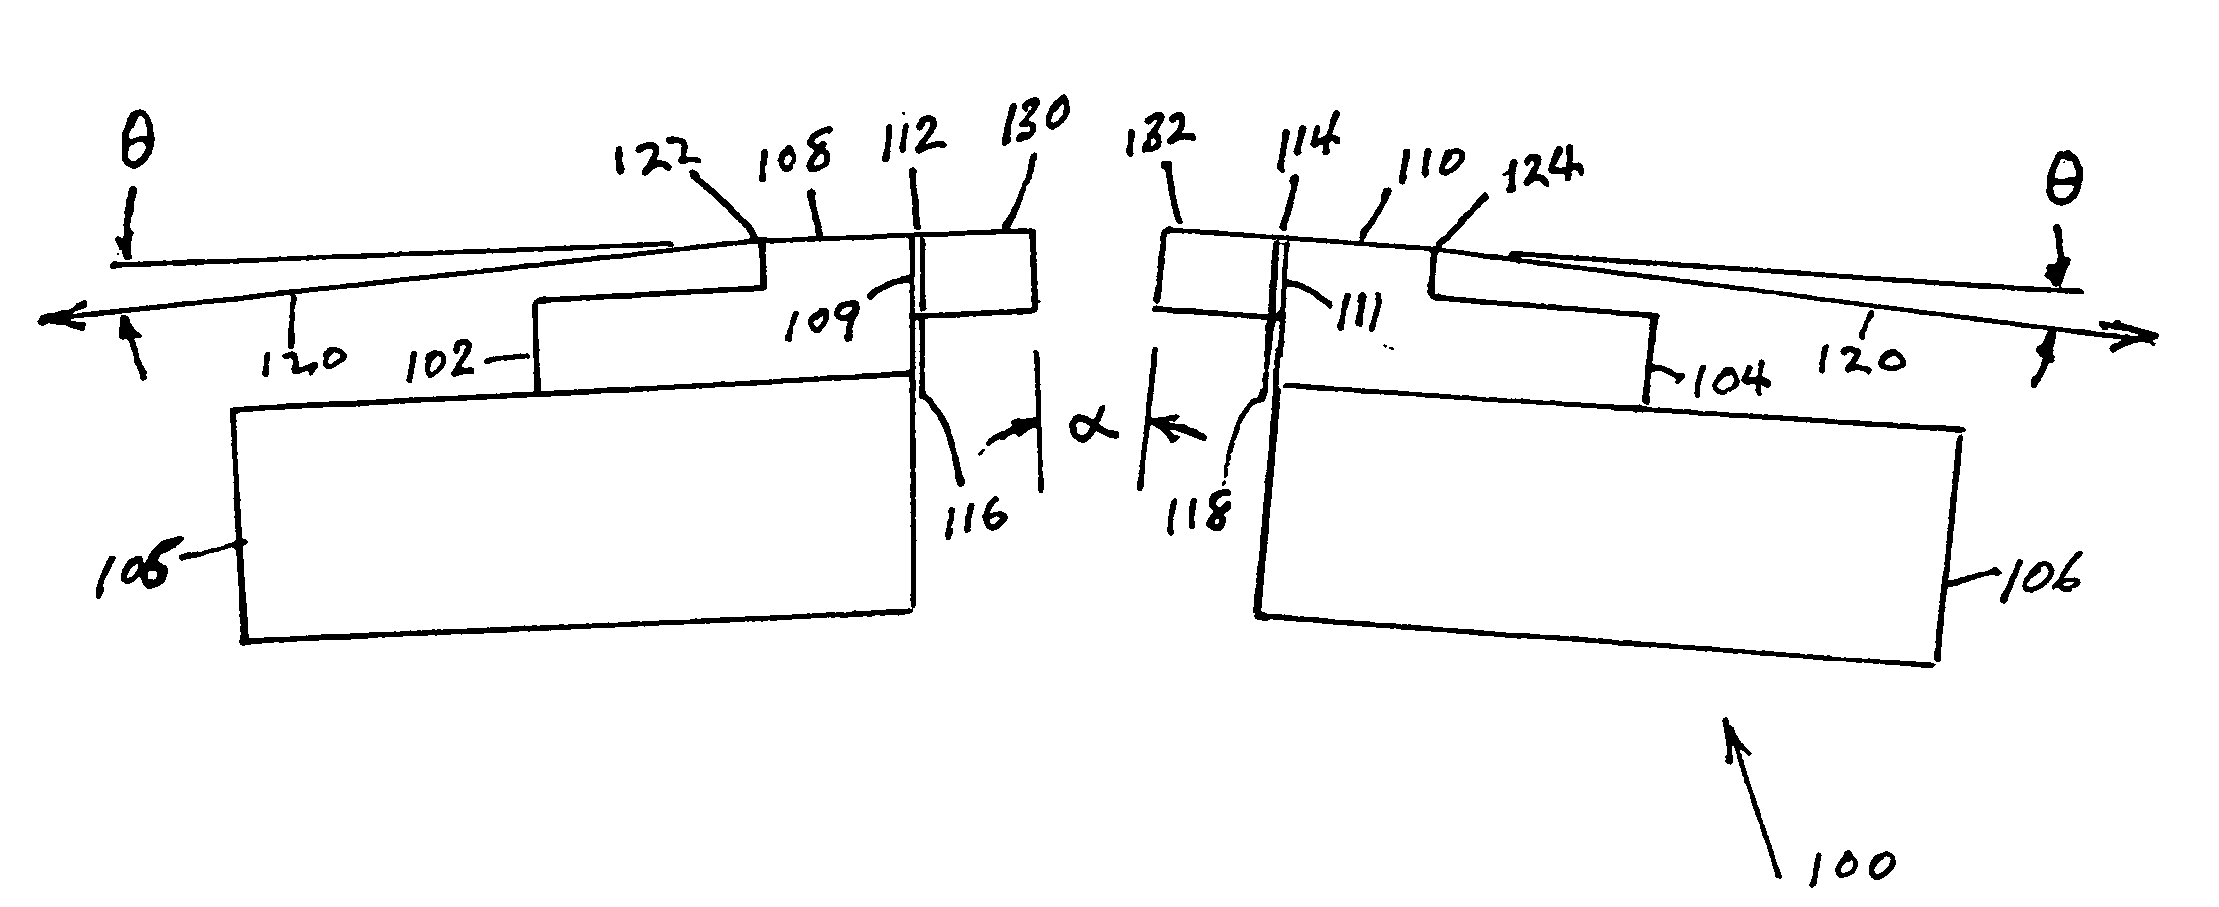 Filled-gap magnetic recording head and method of making